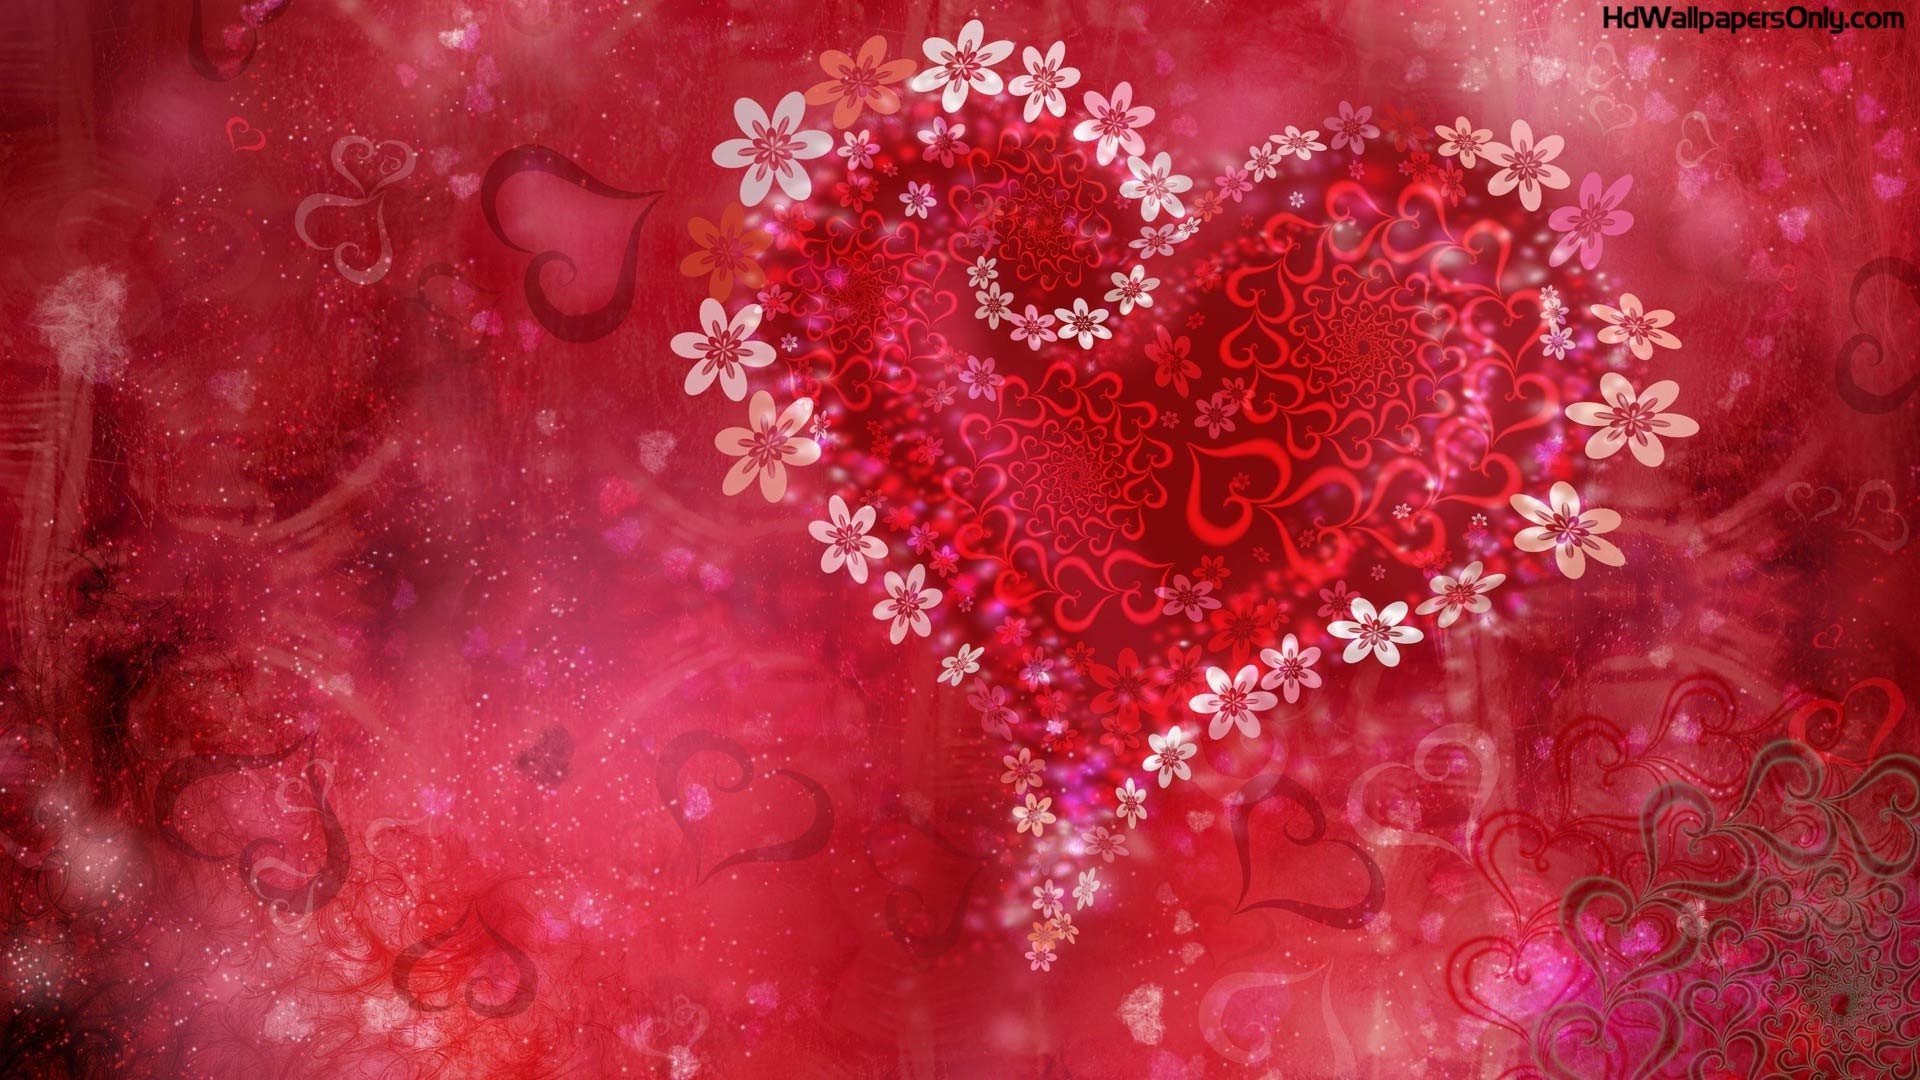 1920x1080 Heart Background 42 352072 High Definition Wallpapers| wallalay.